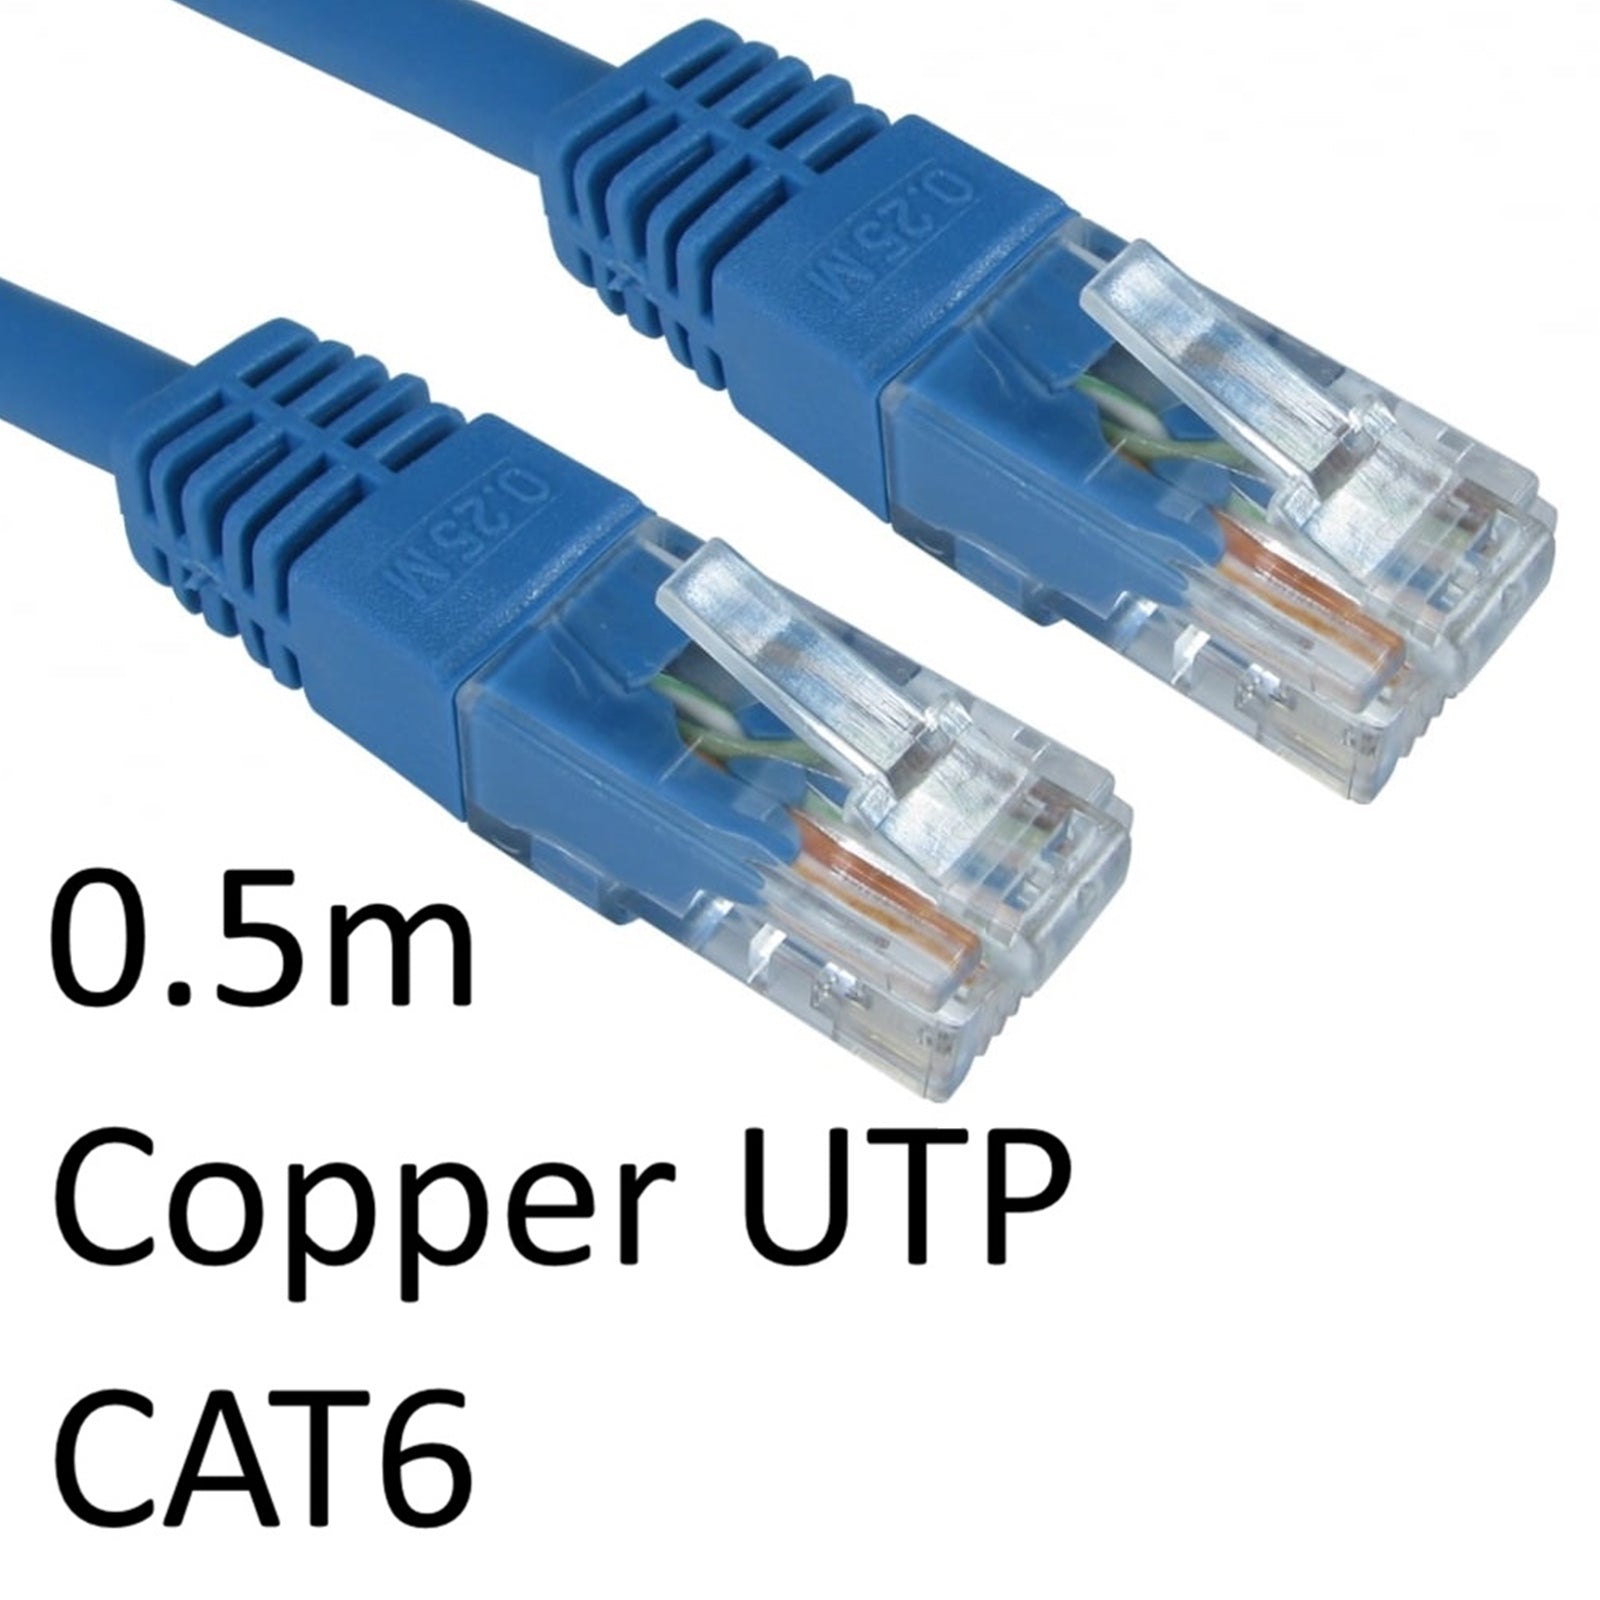 CAT6 RJ45 (M) to RJ45 (M) 0.5m OEM Moulded Boot Copper UTP Network Cable - Blue